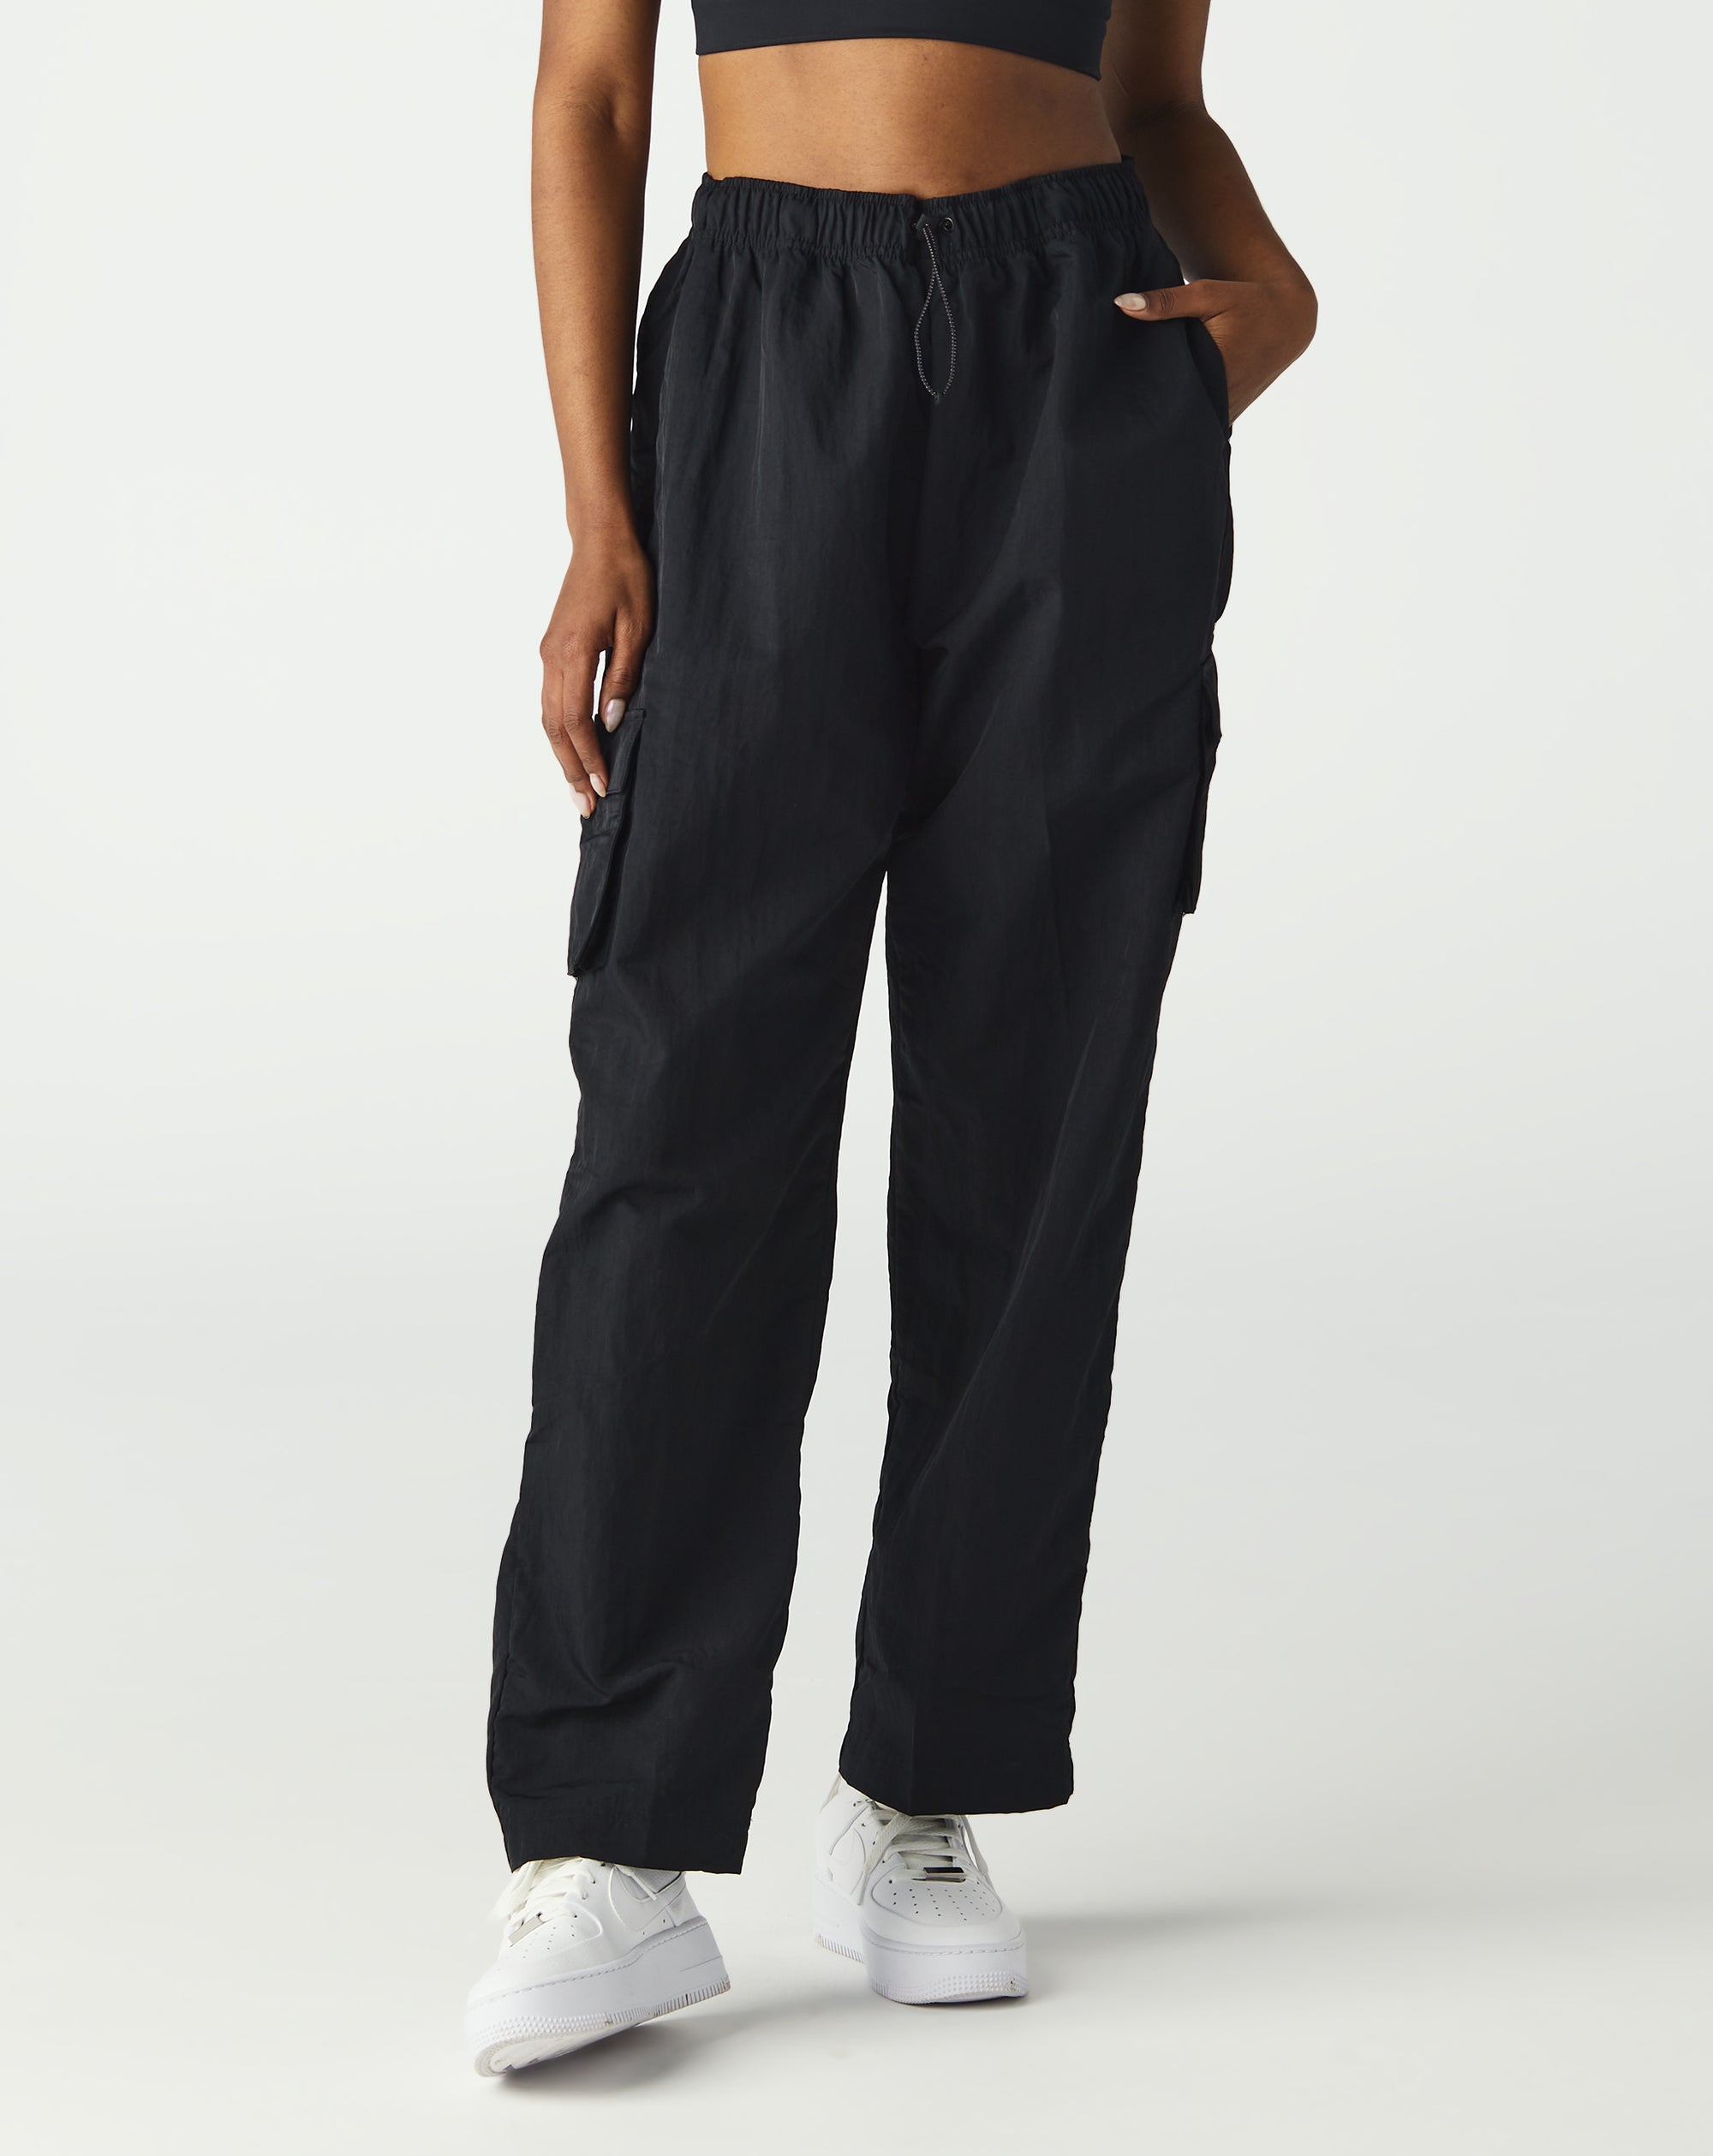 Nike Women's Essential Woven High-Rise Pants - Rule of Next Apparel